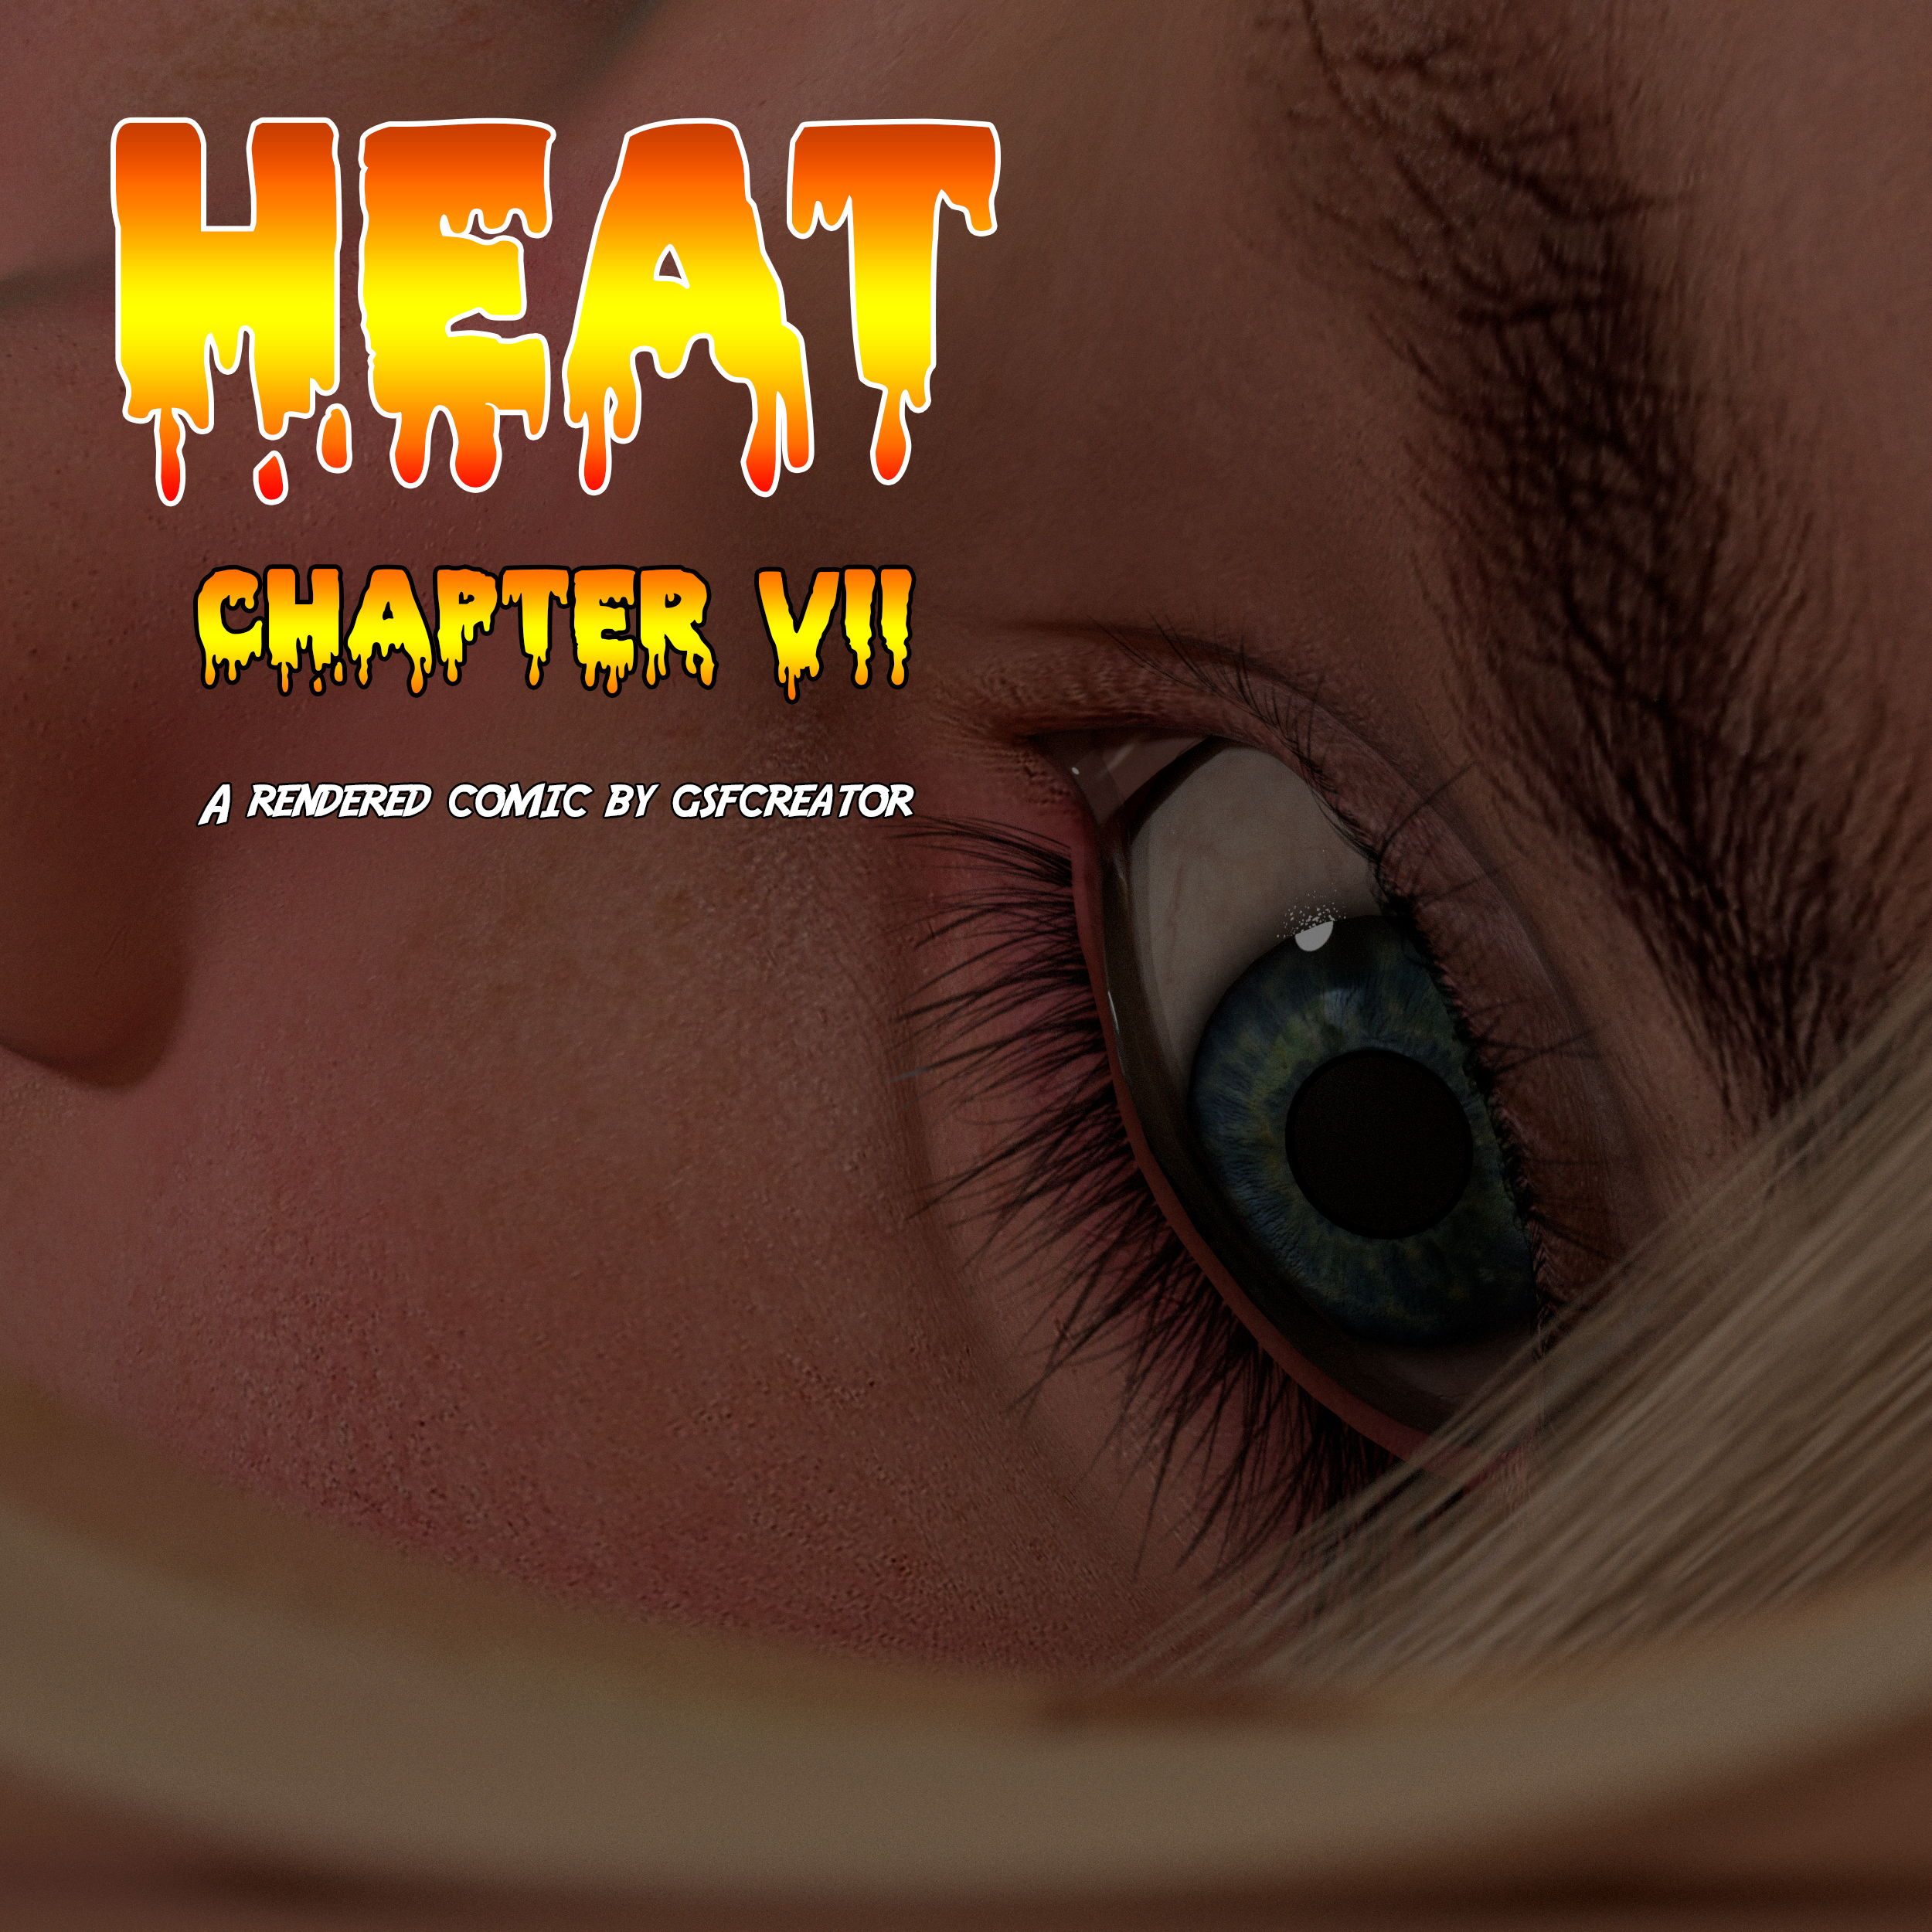 Finally, chapter VII of this Epic shrinking tale is here!
<br><br>
Stephanie comes back home, all dressed up and excited. she's ready for her date with her beloved tiny minion. little does she know about her housemaid, Nadia, Obliviously throwing him into the toilet with Stephanie's toenails...and flushing the water.
<br><br>
Heat VII starts off right where we left on chapter 6, and contains some pretty dramatic developments.
<br><br>
149 files, 2500*2500